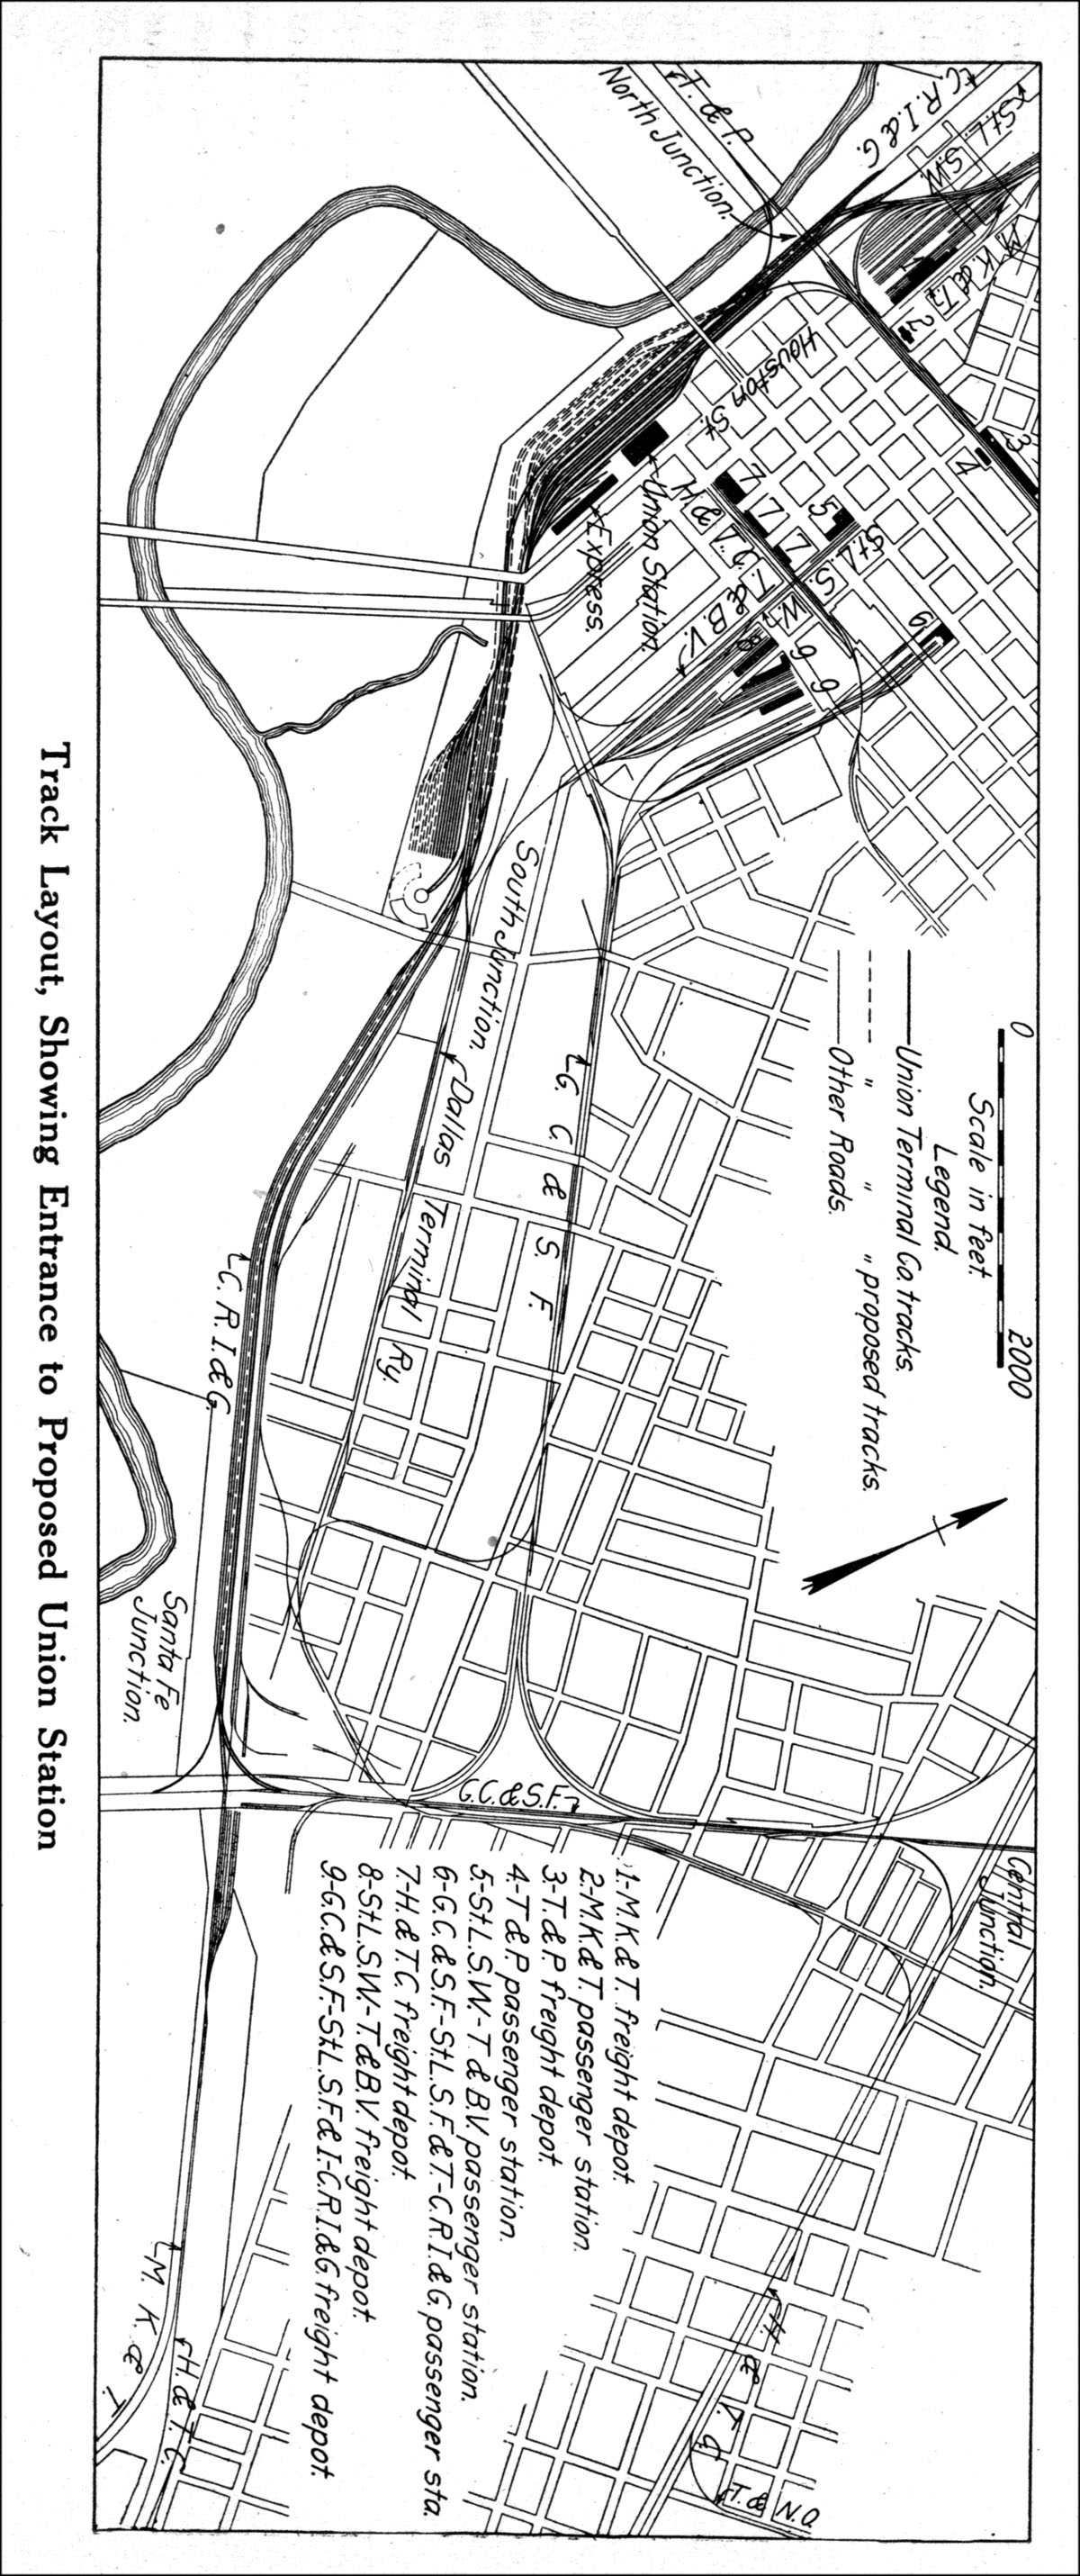 Union Terminal Company (Dallas, Tex.), map showing industrial tracks and proposed Union Station in 1914.